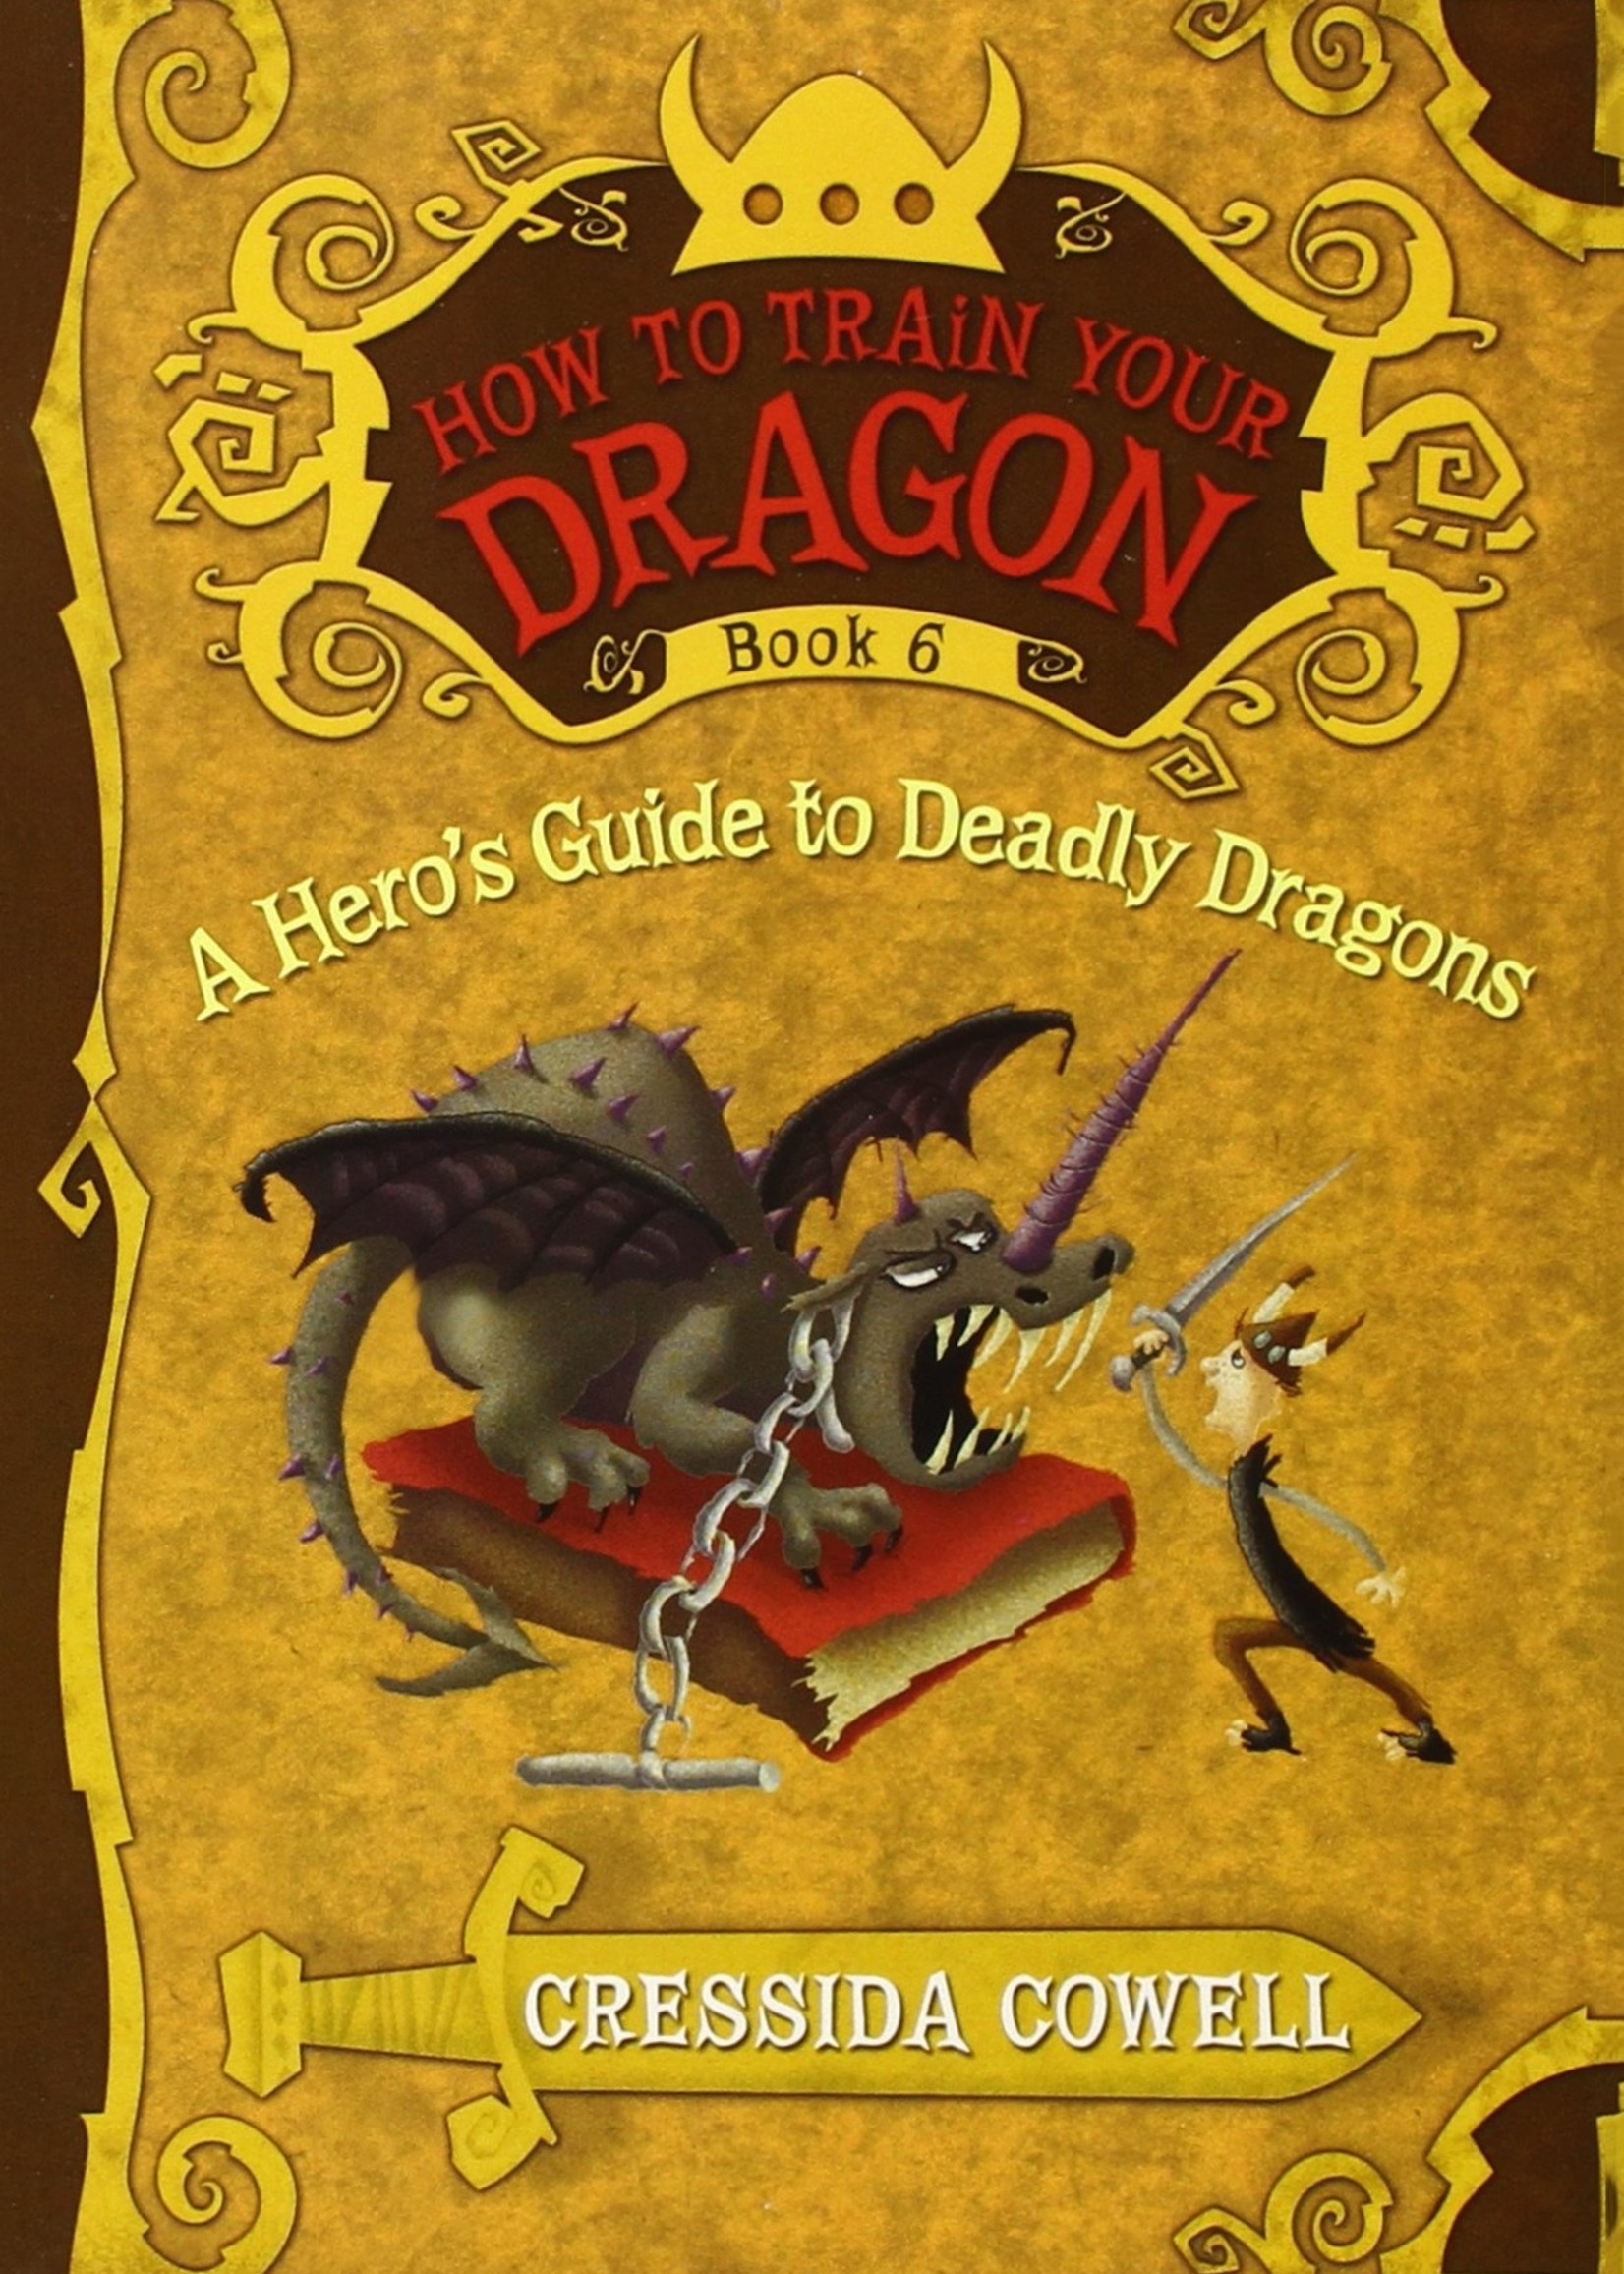 How to Train Your Dragon #06, A Hero's Guide to Deadly Dragons - Paperback